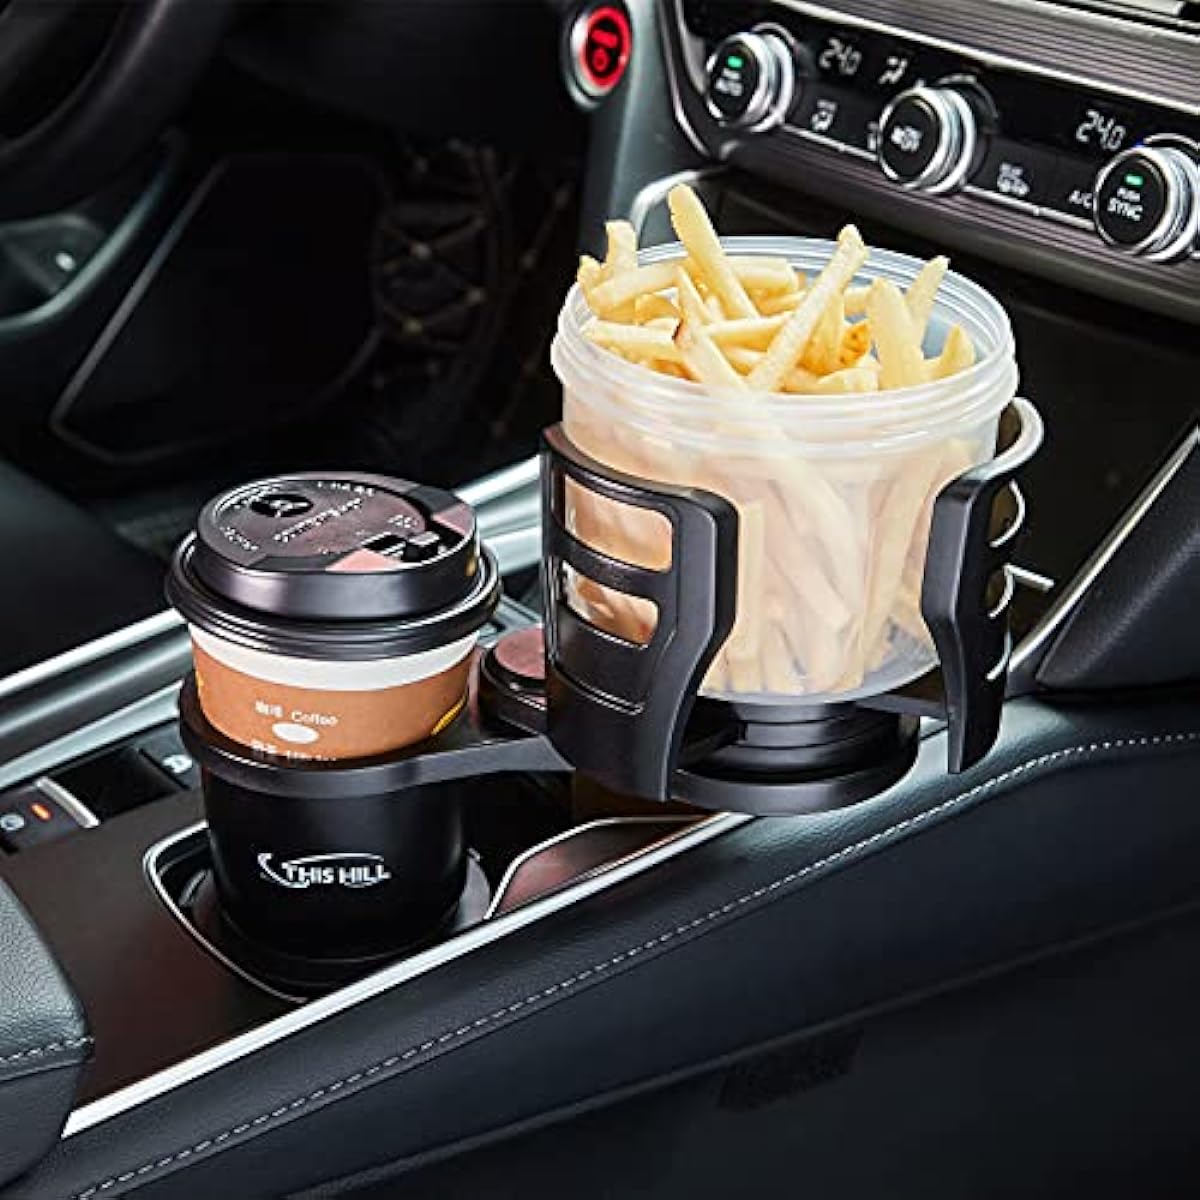 Car 2 in 1 Multifunctional Cup Holder Expander Adapter Organizer